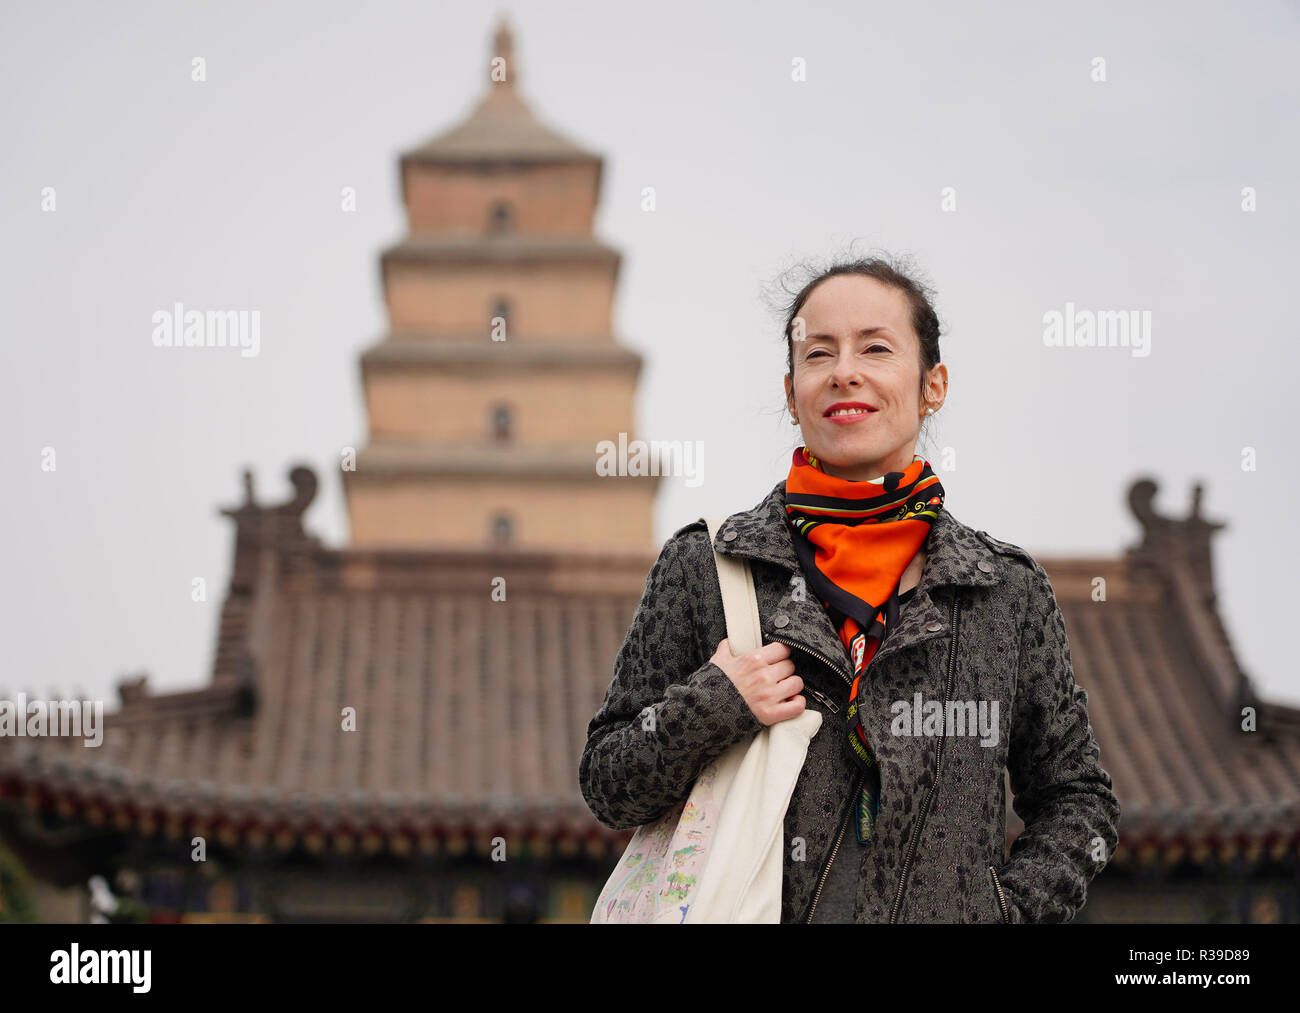 (181122) -- BEIJING, Nov. 22, 2018 (Xinhua) -- Berenice Zandonai, a French national, walks in a square in Xi'an, capital city of northwest China's Shaanxi Province, Oct. 19, 2018. Came to China in 2006 to pursue her Chinese lover she met in France two years ago, Berenice began her career as a designer in a garment company in Shanghai till 2014 when she decided to move to Xi'an to create their own studio to promote cultural exchange between China and France producing illustrations, creative souvenirs and new media, as well as publishing, cinema and theatrical works. (Xinhua/Shao Rui) (clq) Stock Photo